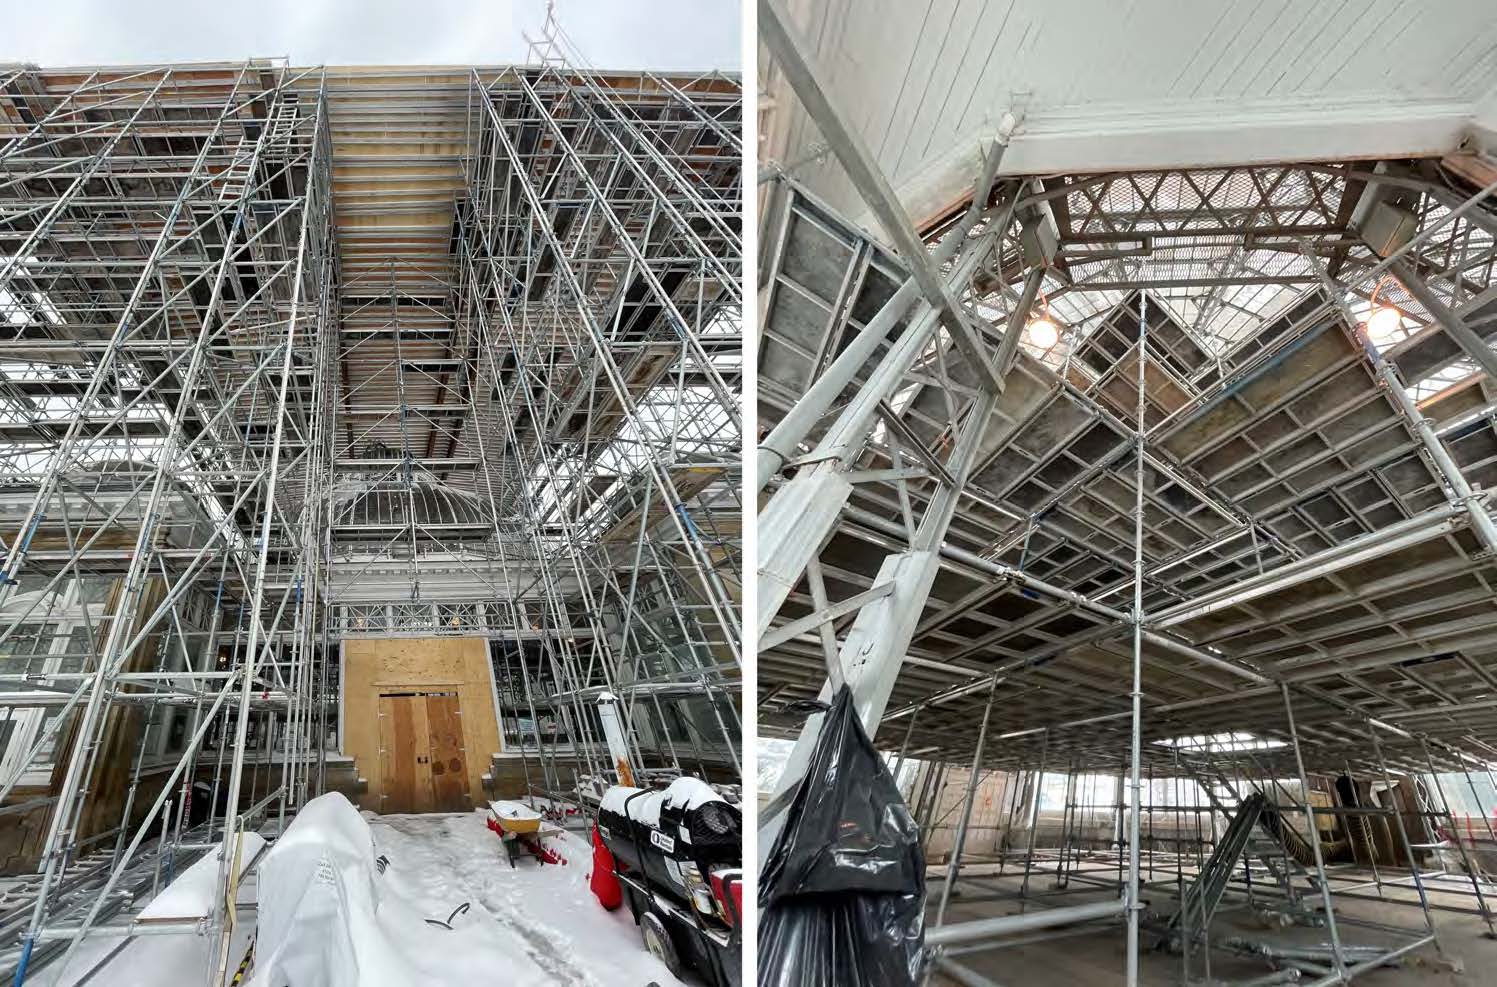 A photograph with two images side by side showing the interior and exterior work happening at the Palm House building. On the left, shows the exterior entrance of the building taken at ground level which has a door boarded up with wood surrounded by tall steel scaffolding from the ground to the top of the building. On the right, shows the interior of the building taken looking up towards the domed roof, which shows with steel scaffolding and various platforms. 